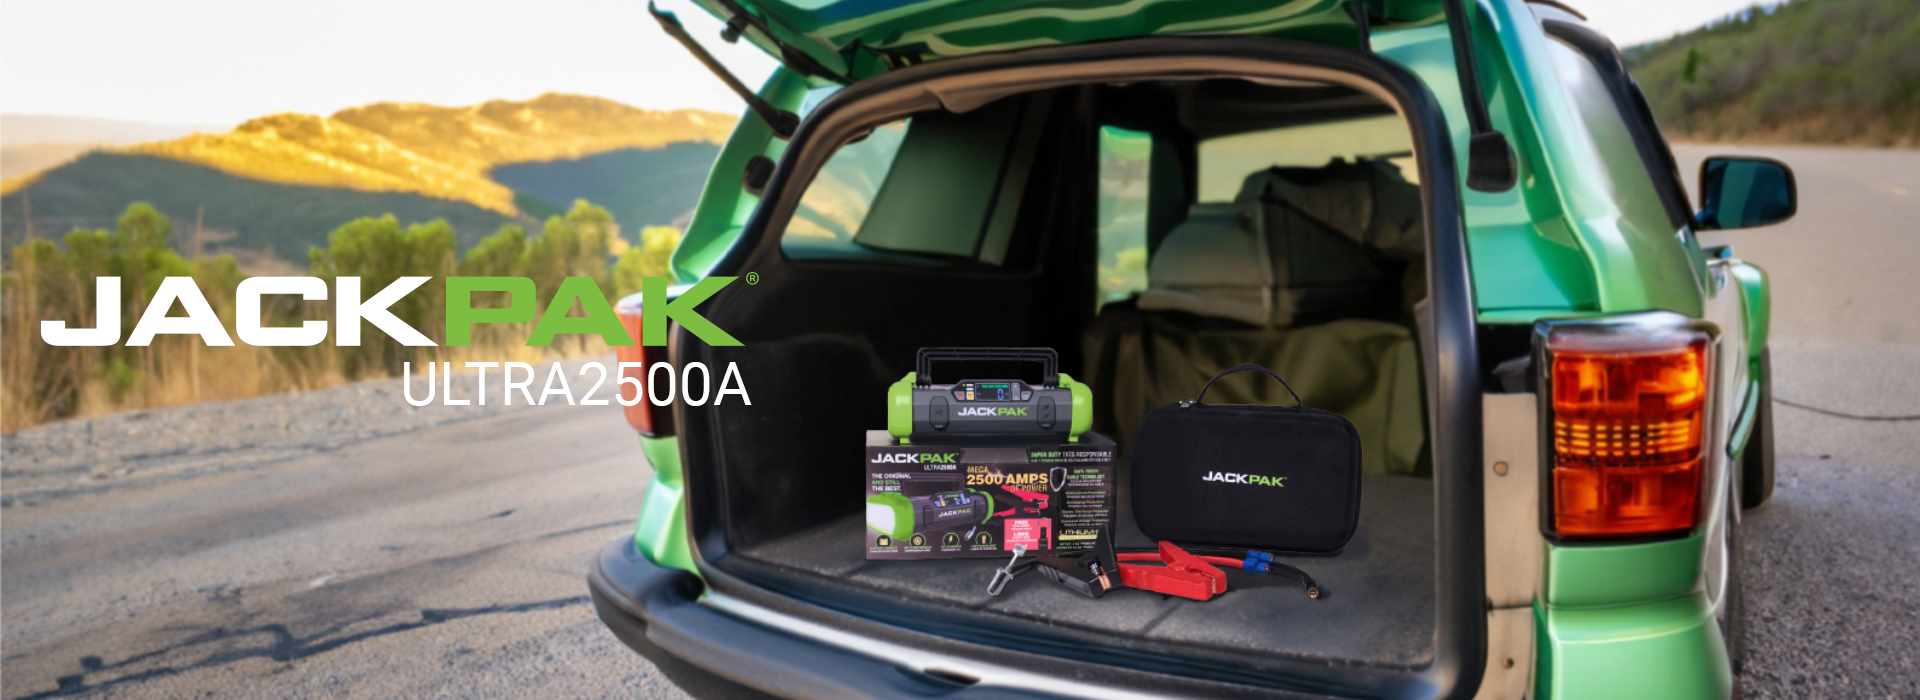 Green SUV with rear hatch open displaying Ultra2500A portable power pack sitting in rear cargo area